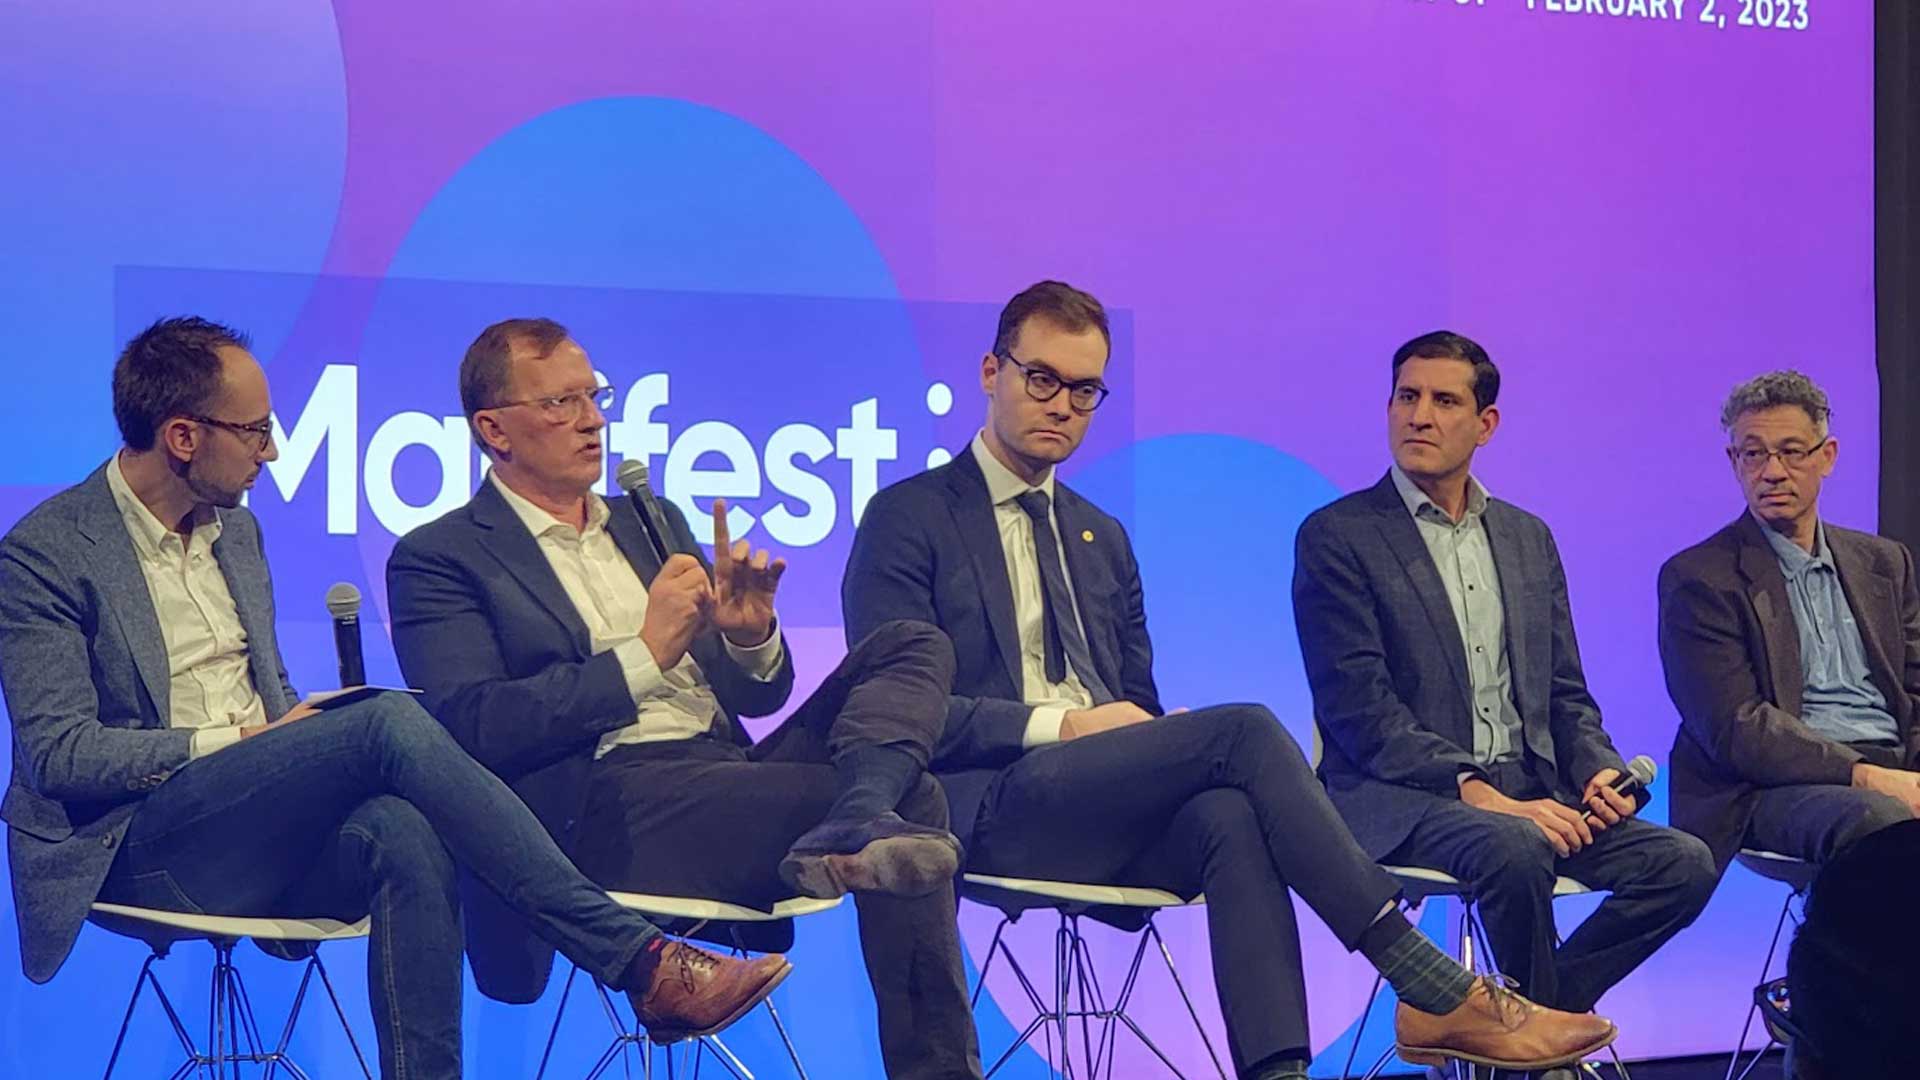 My Top 3 Takeaways from the Manifest 2023 Conference in Las Vegas